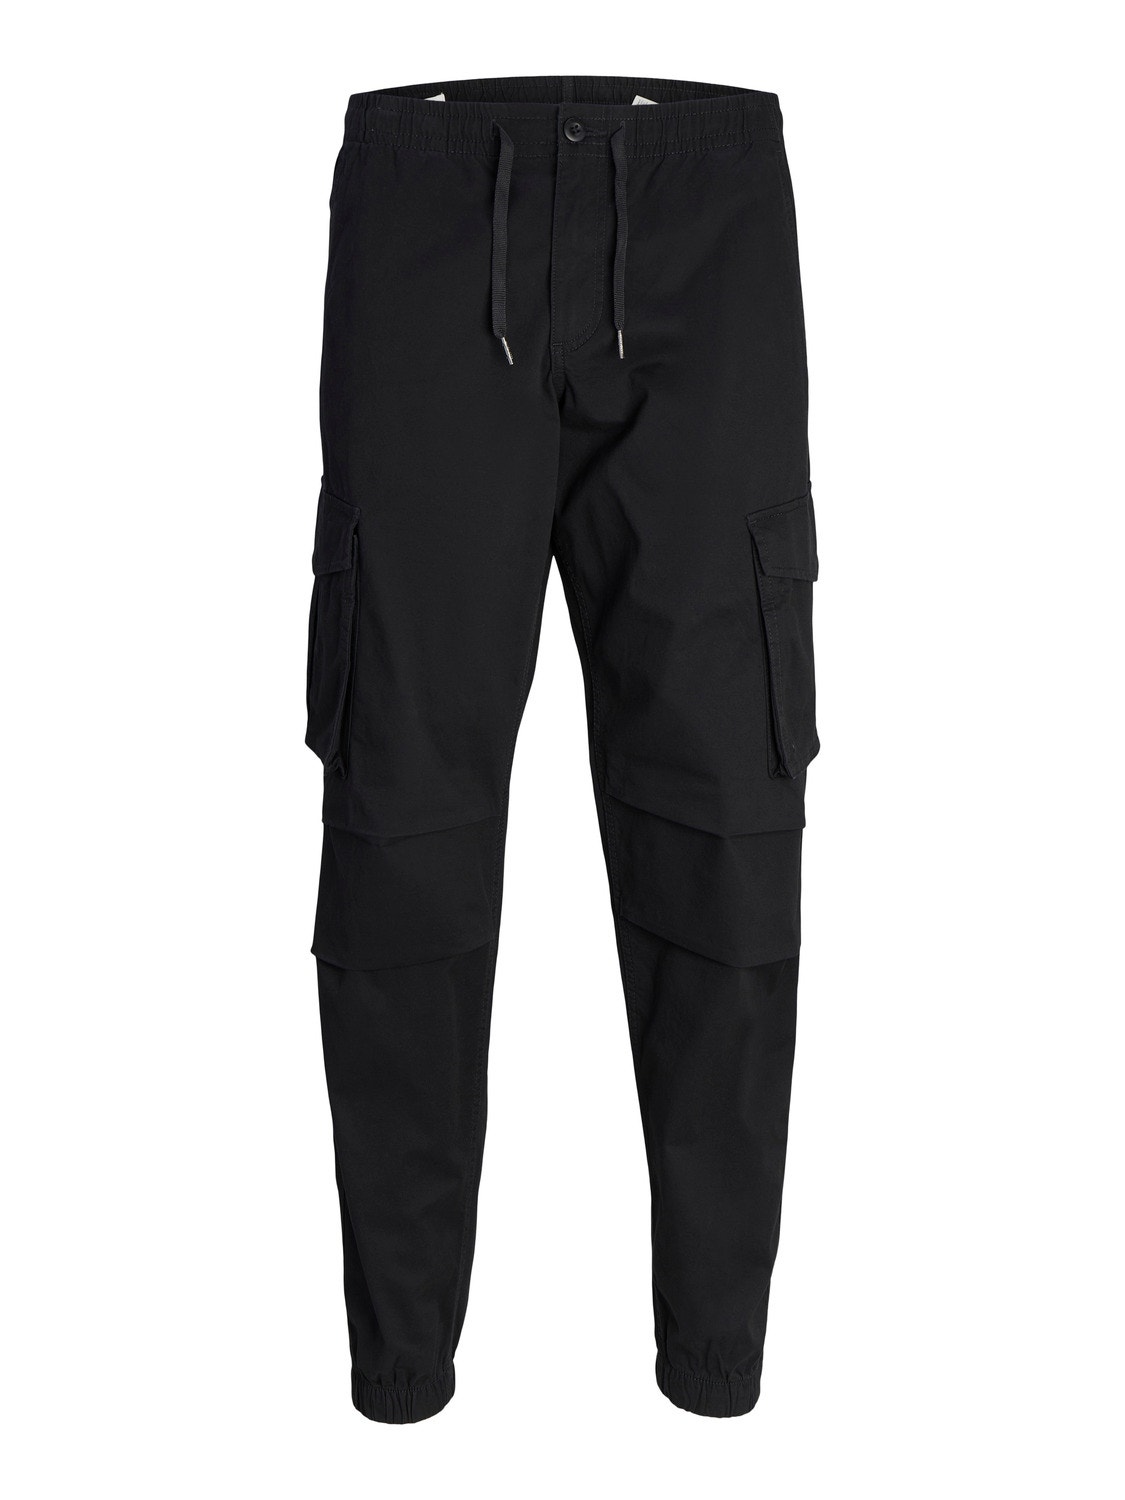 Jack & Jones Relaxed Fit Cargo trousers -Black - 12242264